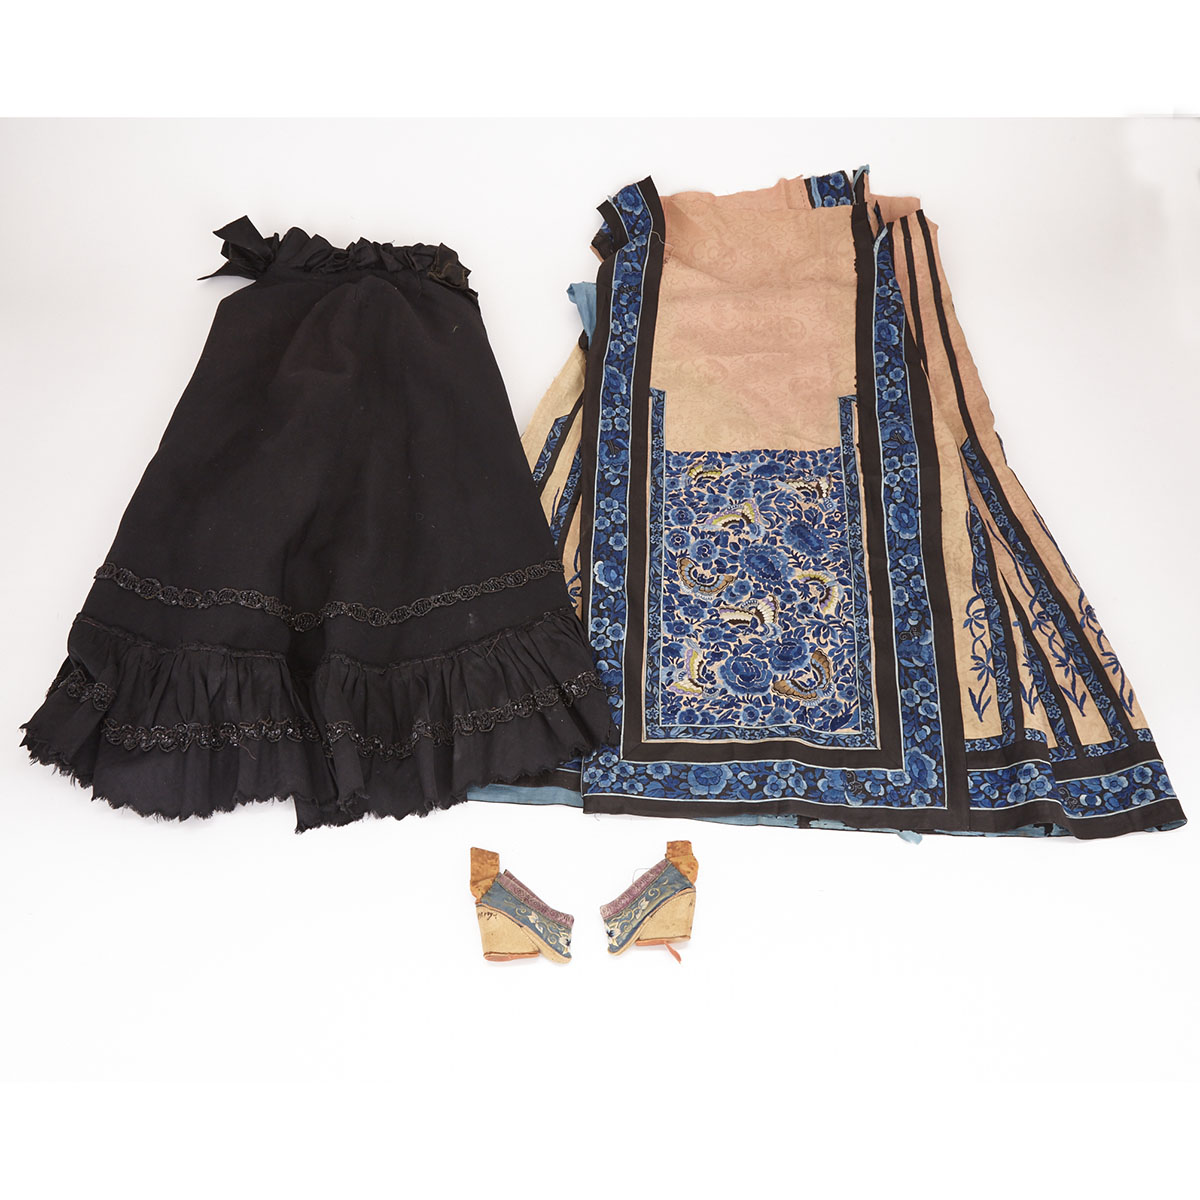 Chinese Silk Robe together with Pair of Women’s Shoes with Black Cape